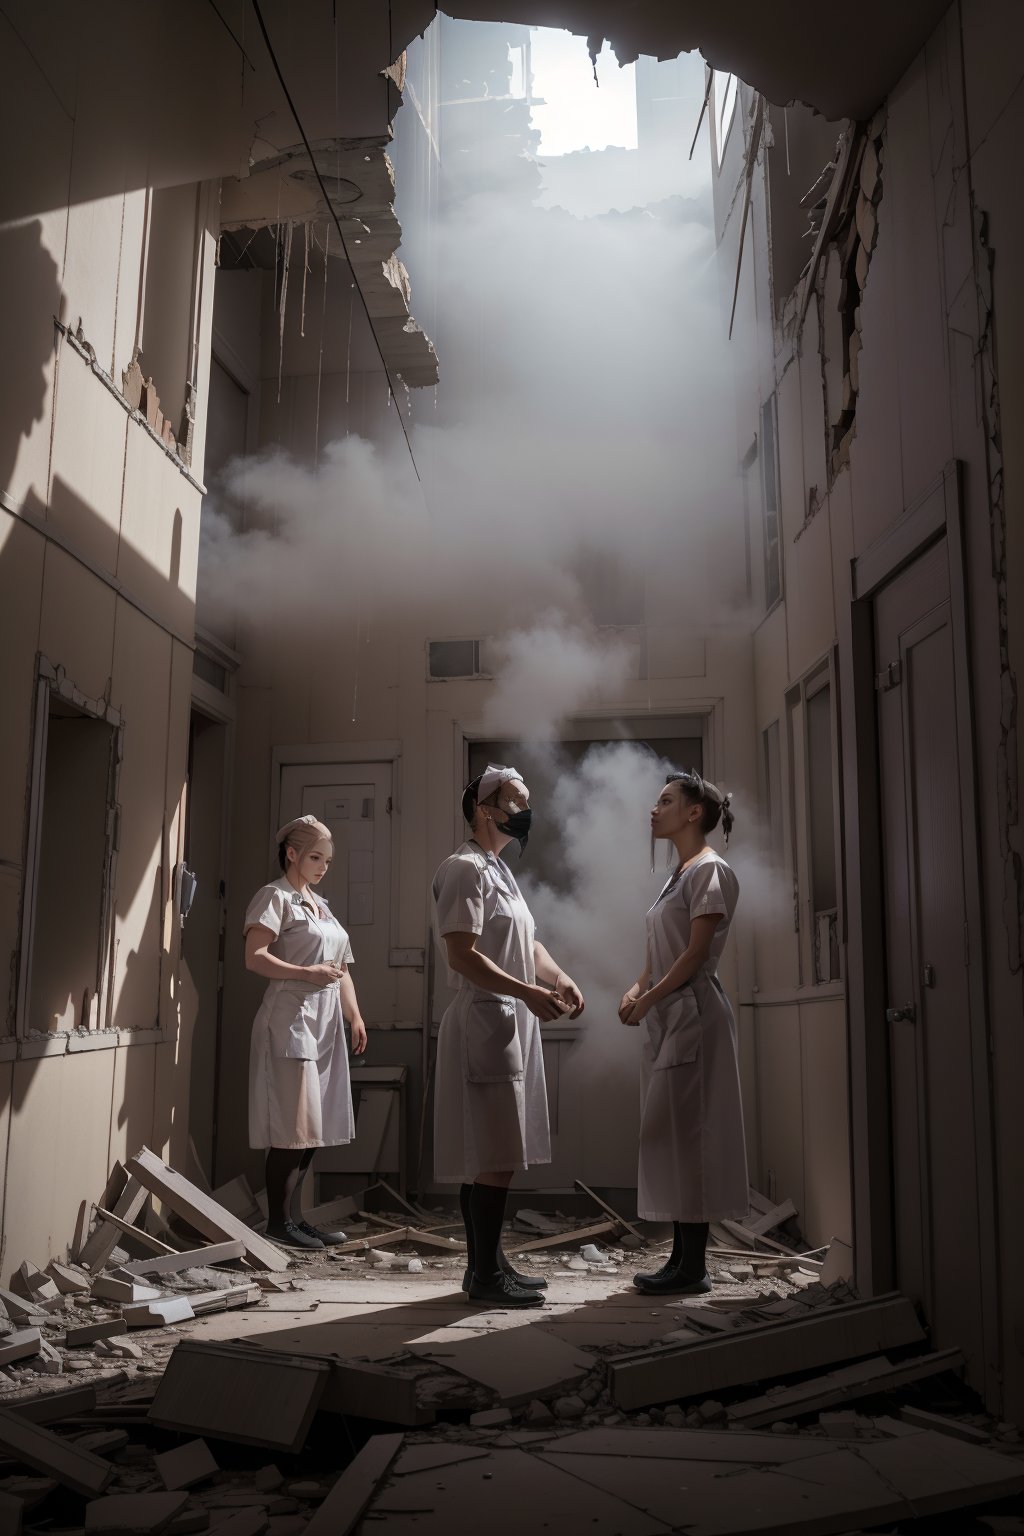 A hauntingly eerie scene unfolds: a group of nurses in worn, 1950s-style uniforms, their faces pale and tired, stand solemnly amidst the crumbling remains of an abandoned hospital. The flickering fluorescent lights above cast long shadows across the walls as they gaze down at something on the floor. Their expressions convey a mix of sadness, fear, and resignation. In the background, the eerie mist-shrouded fog creeps in through broken windows, adding to the sense of foreboding.